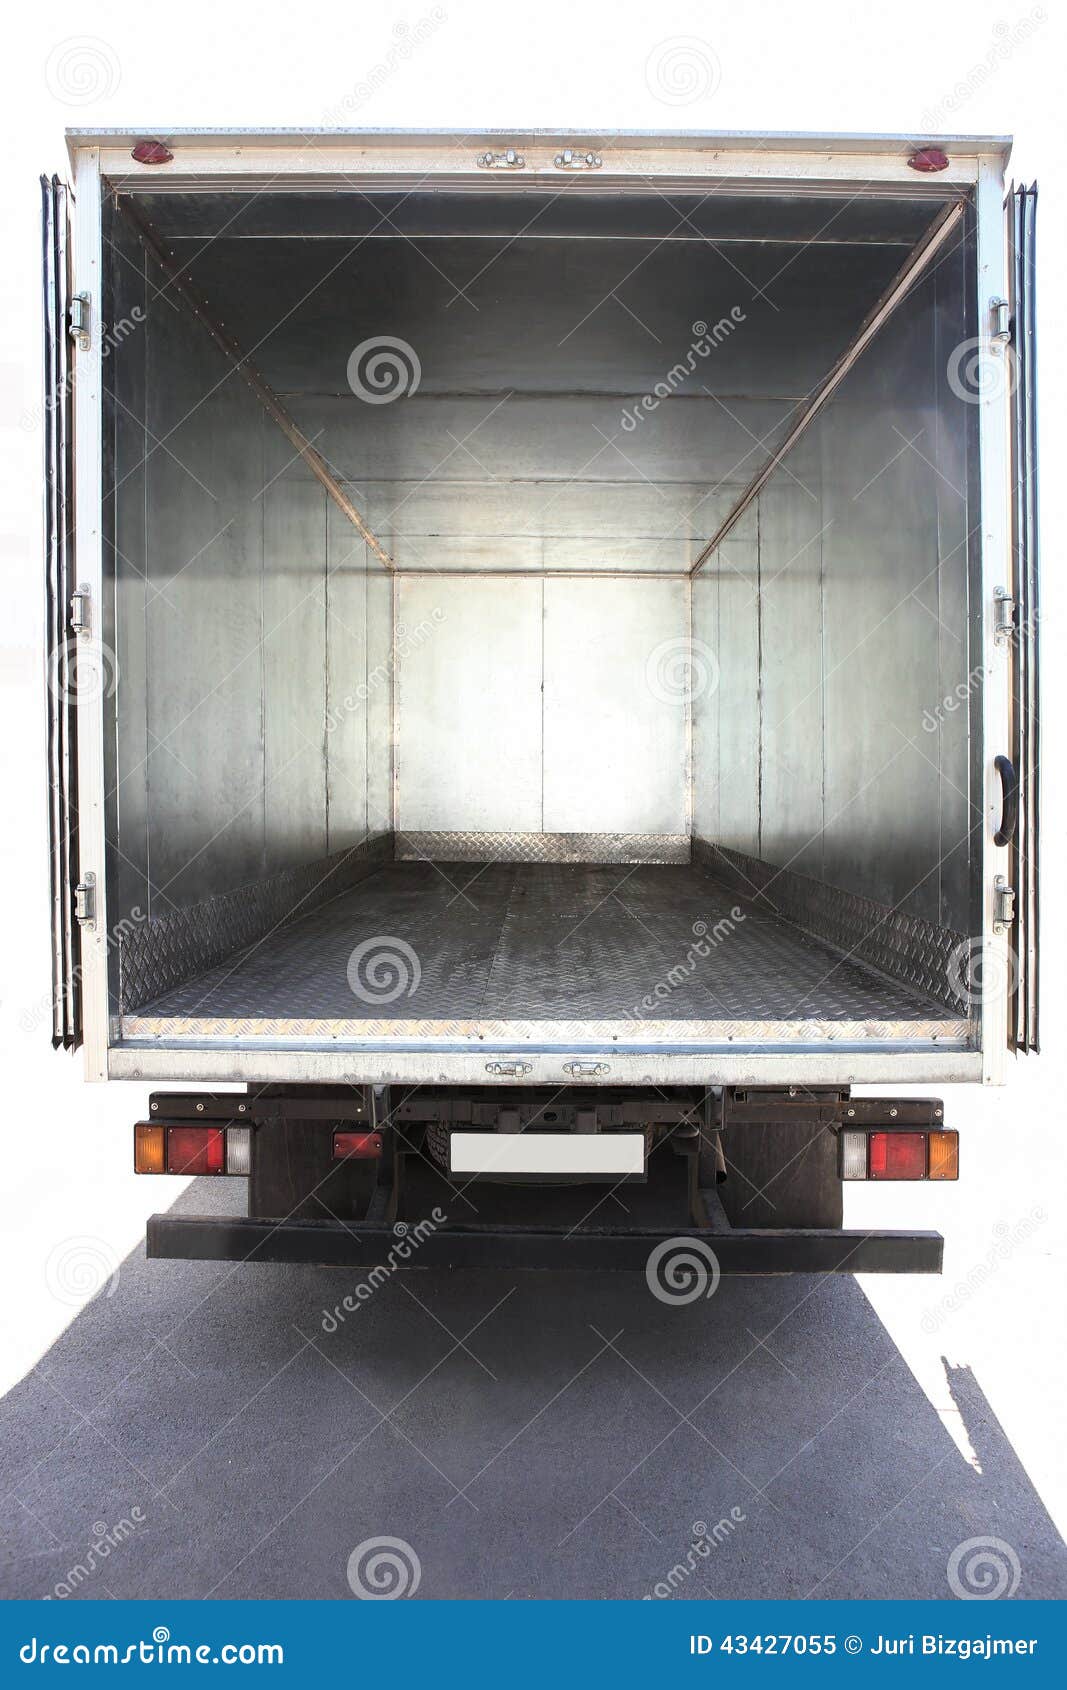 Open Container  Of The Truck  Stock Image Image of room 